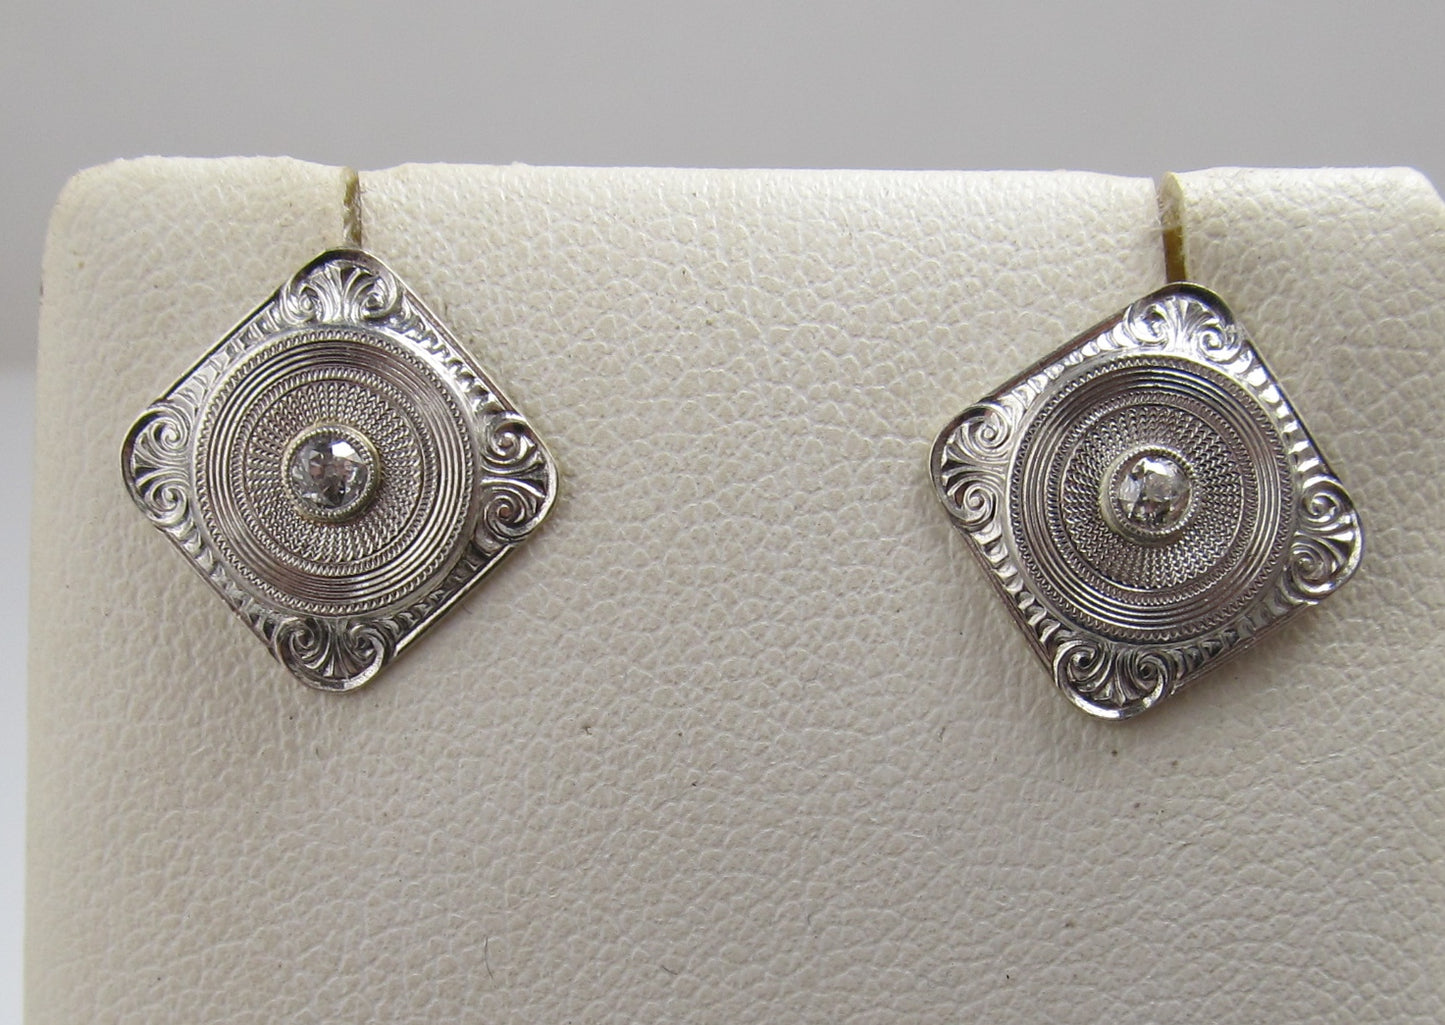 Vintage platinum diamond converted cufflink earrings, Victorious Cape May